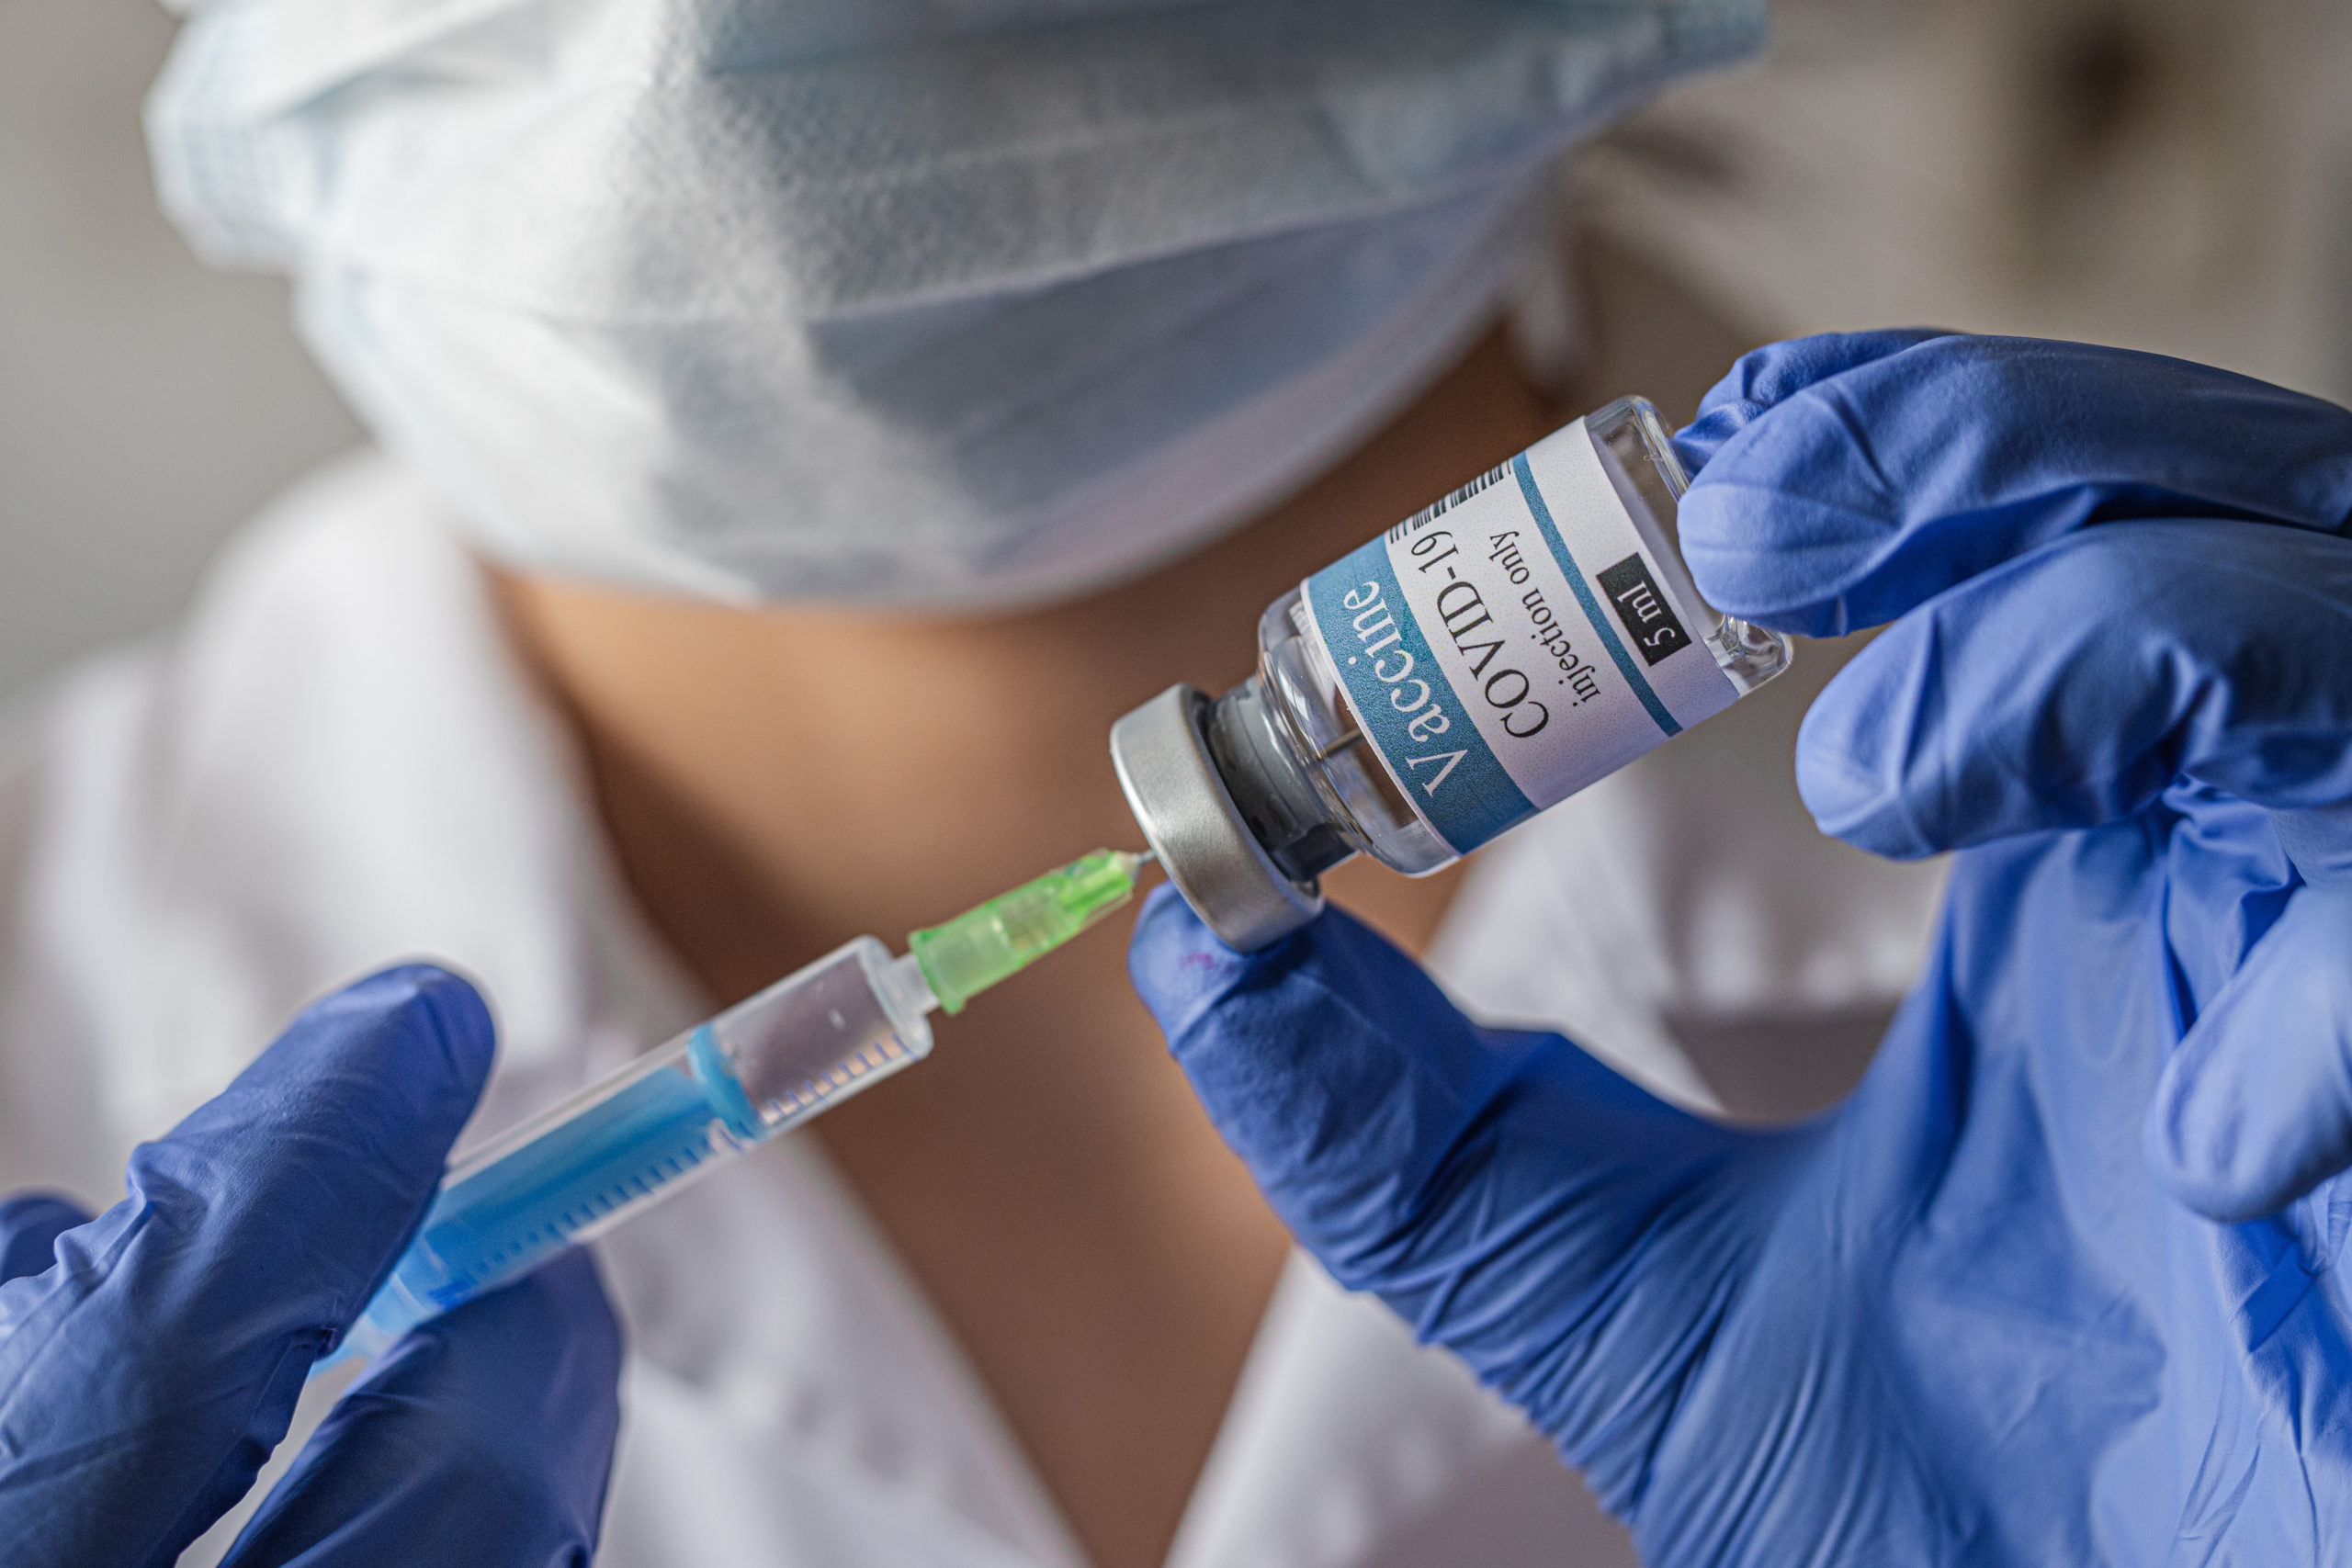 What You Need To Know About The Australian COVID Vaccination Policy As An Expat in Australia